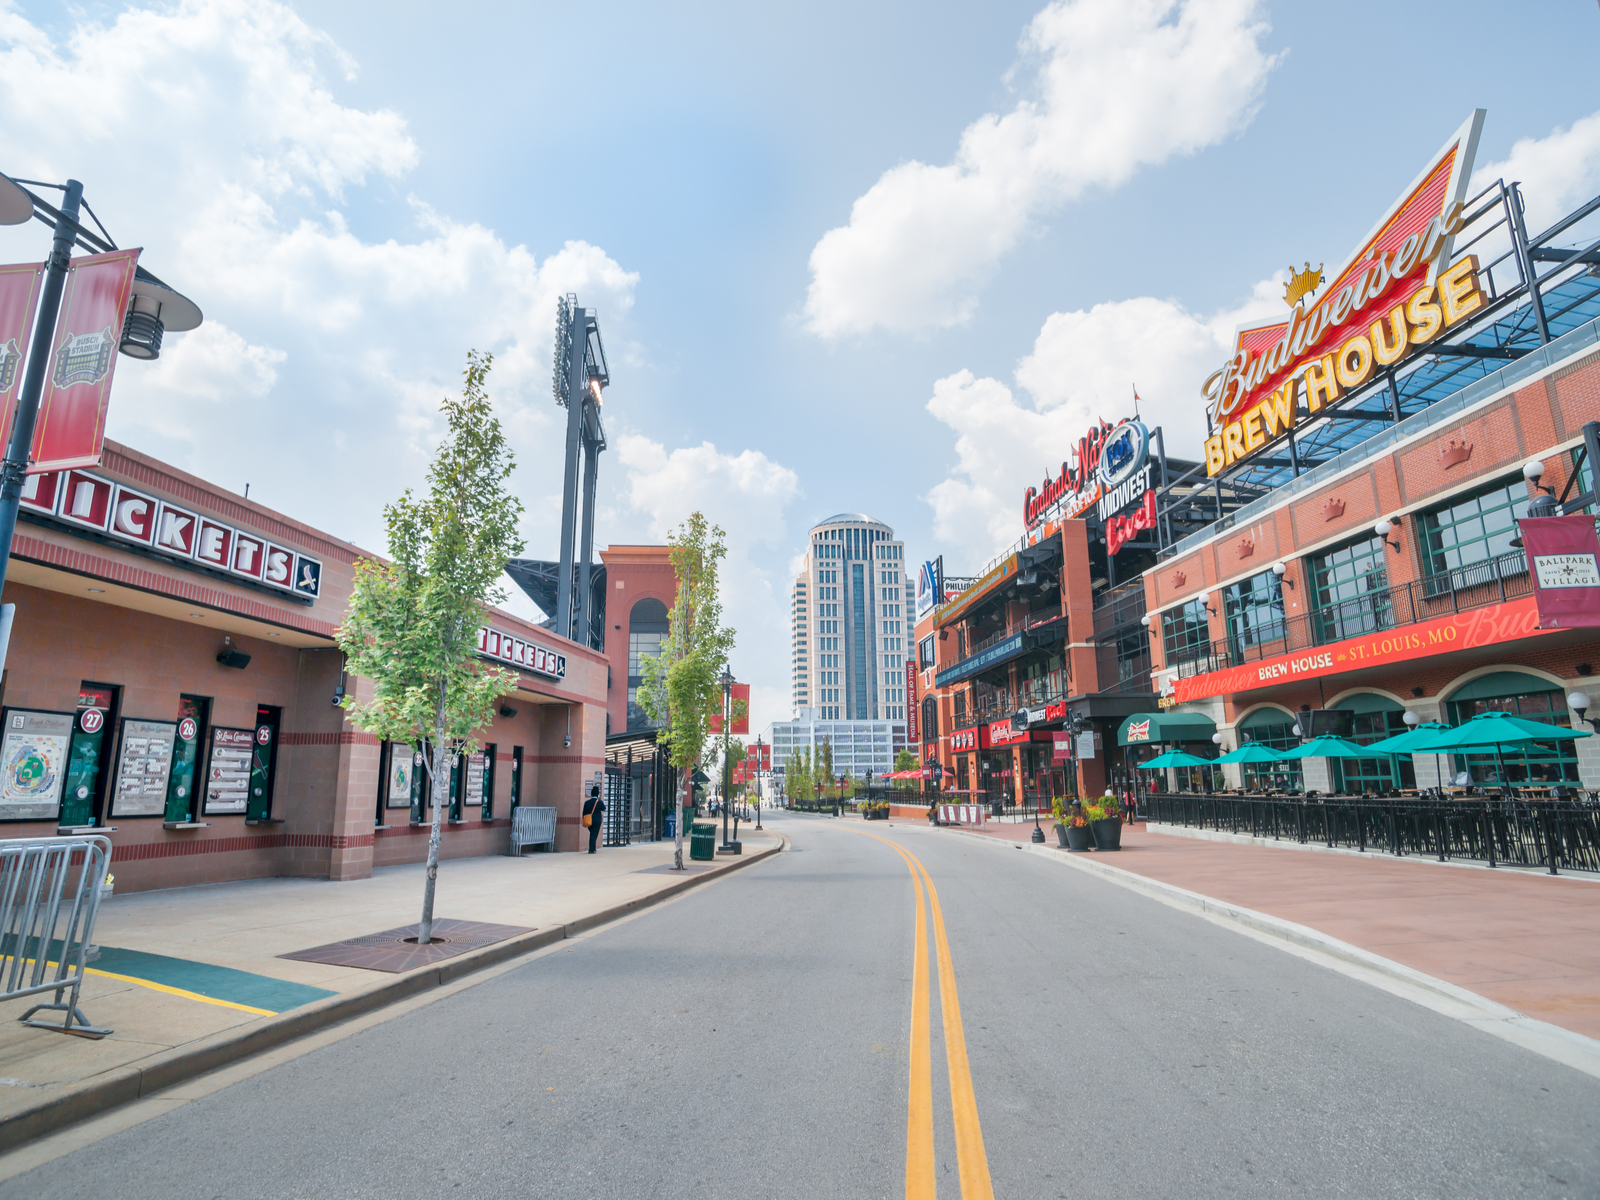 Clark Avenue Ballpark Village pictured from the street for a piece on the best things to do in St. Louis